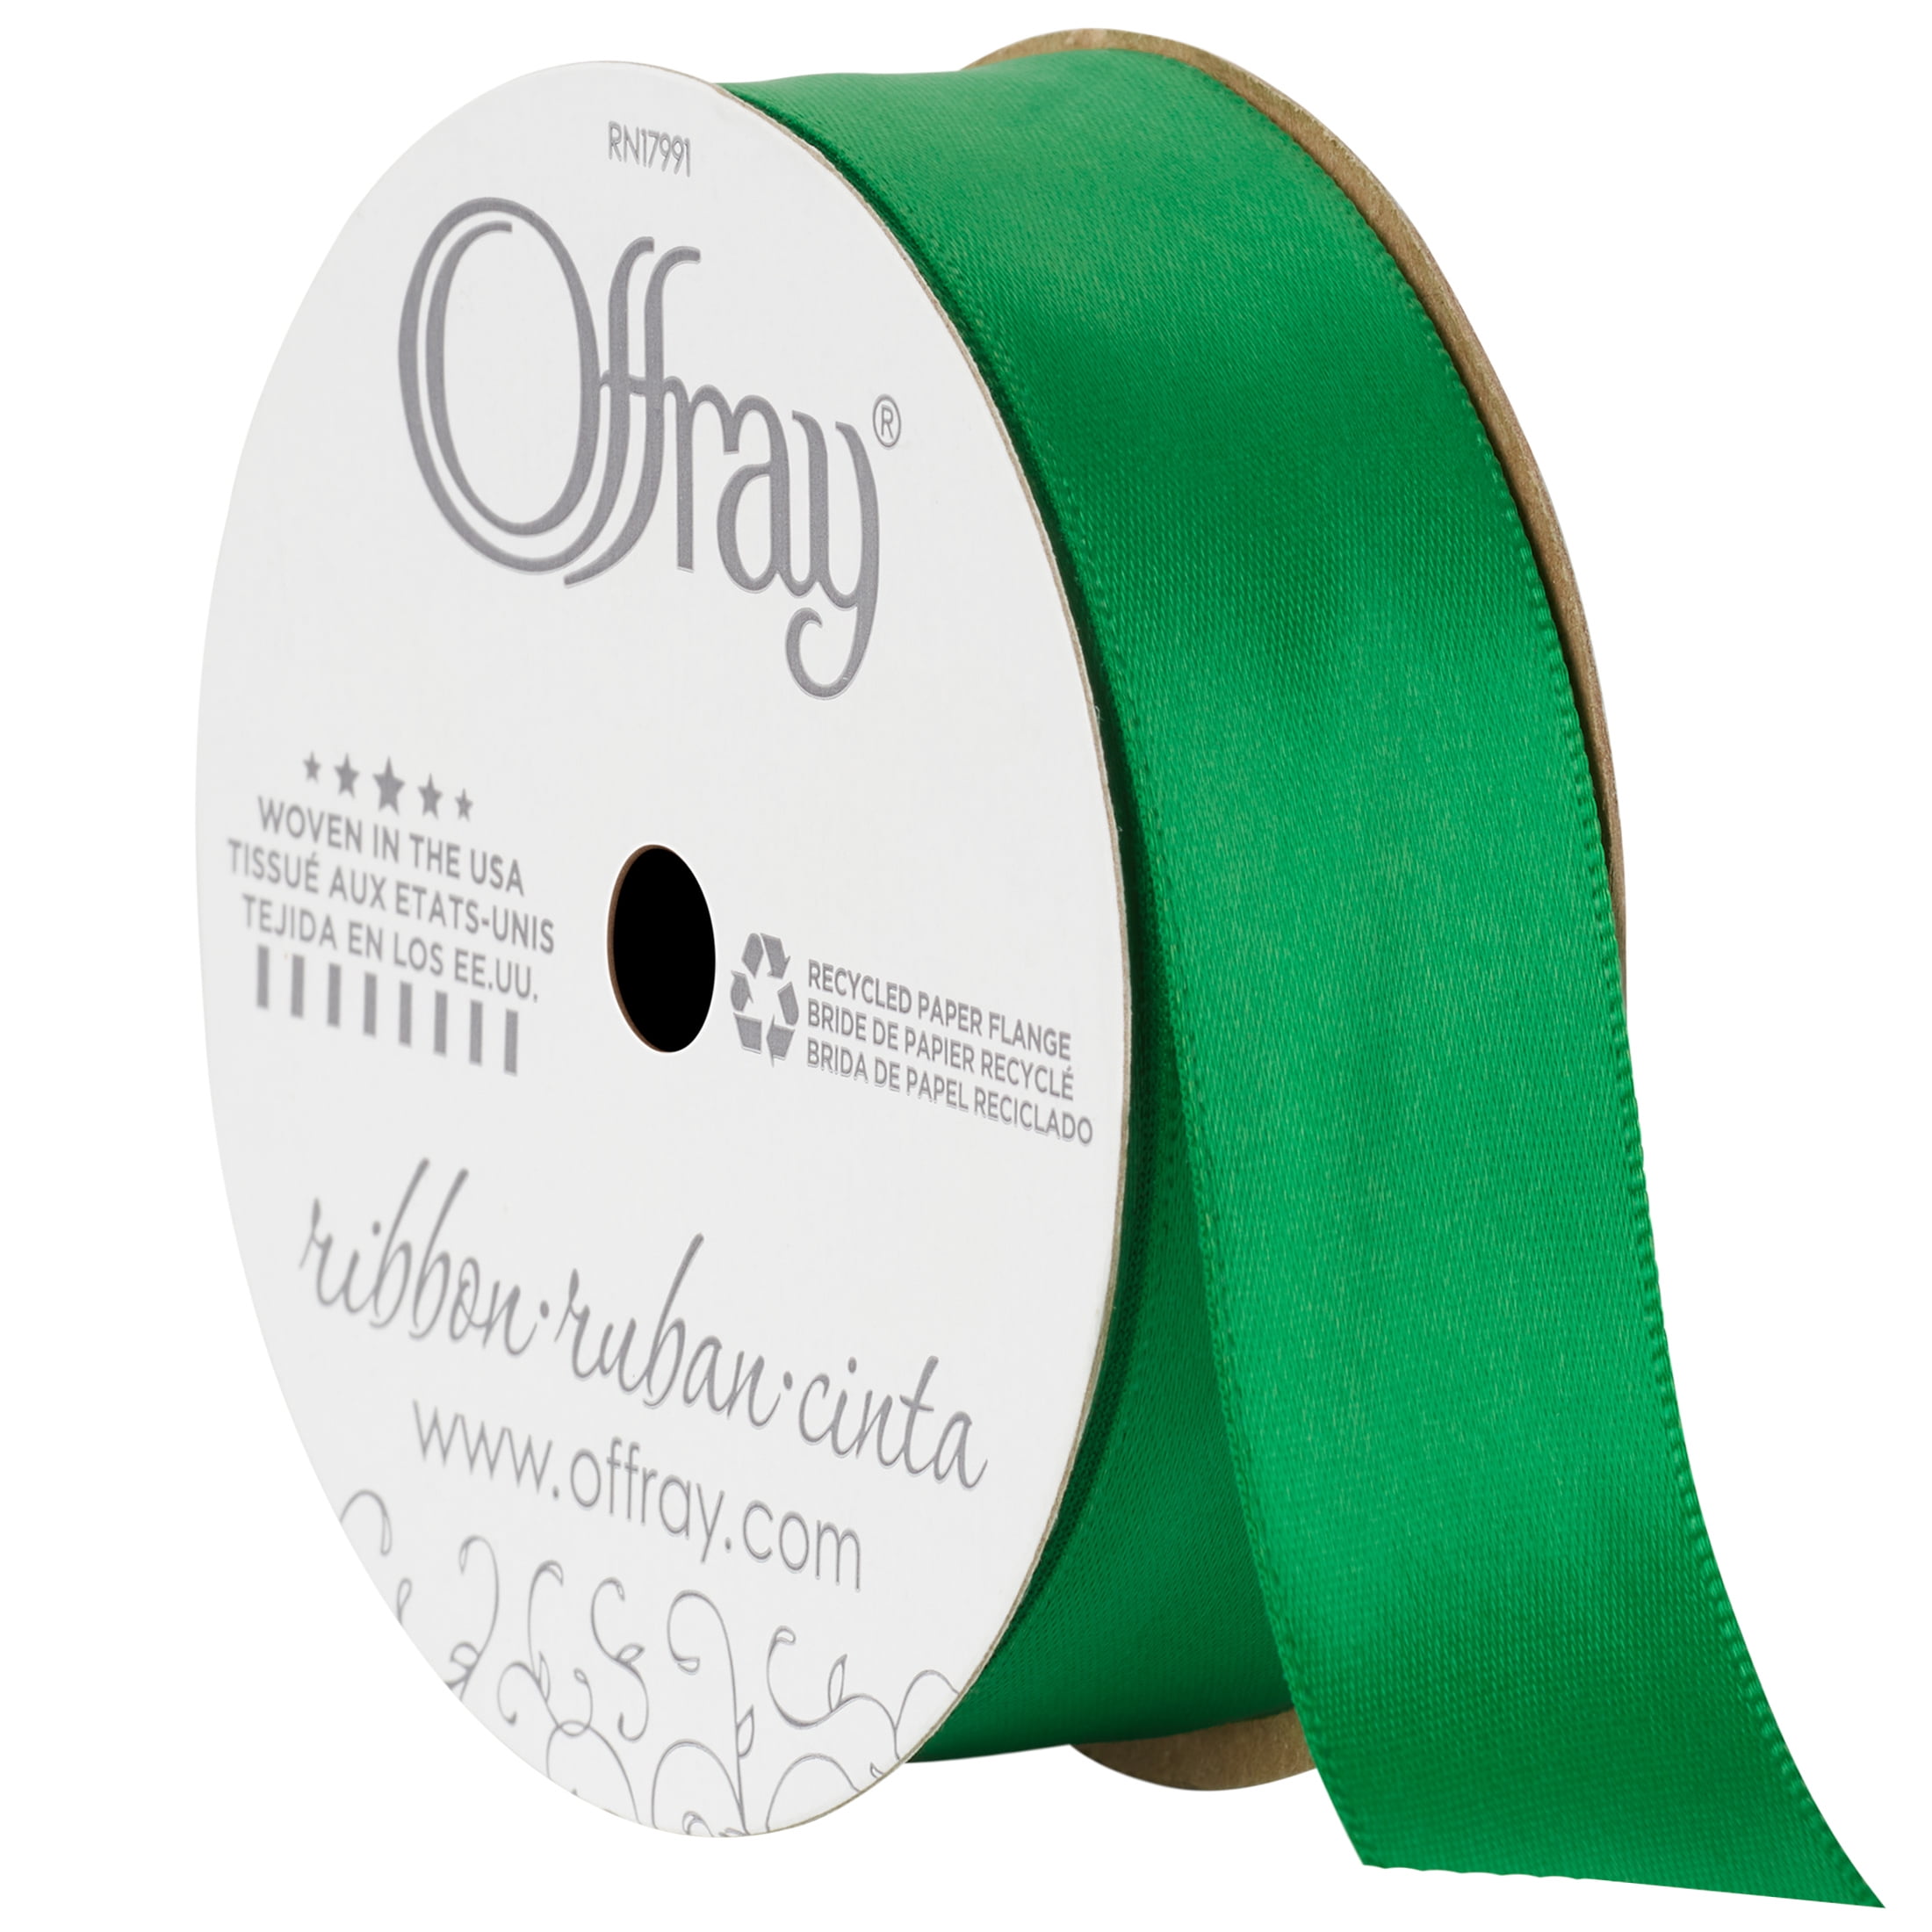 Exclusive USA | American Made 250 Emerald Green Satin Awareness Ribbons -  Bag of 250 Fabric Ribbons with Safety Pins